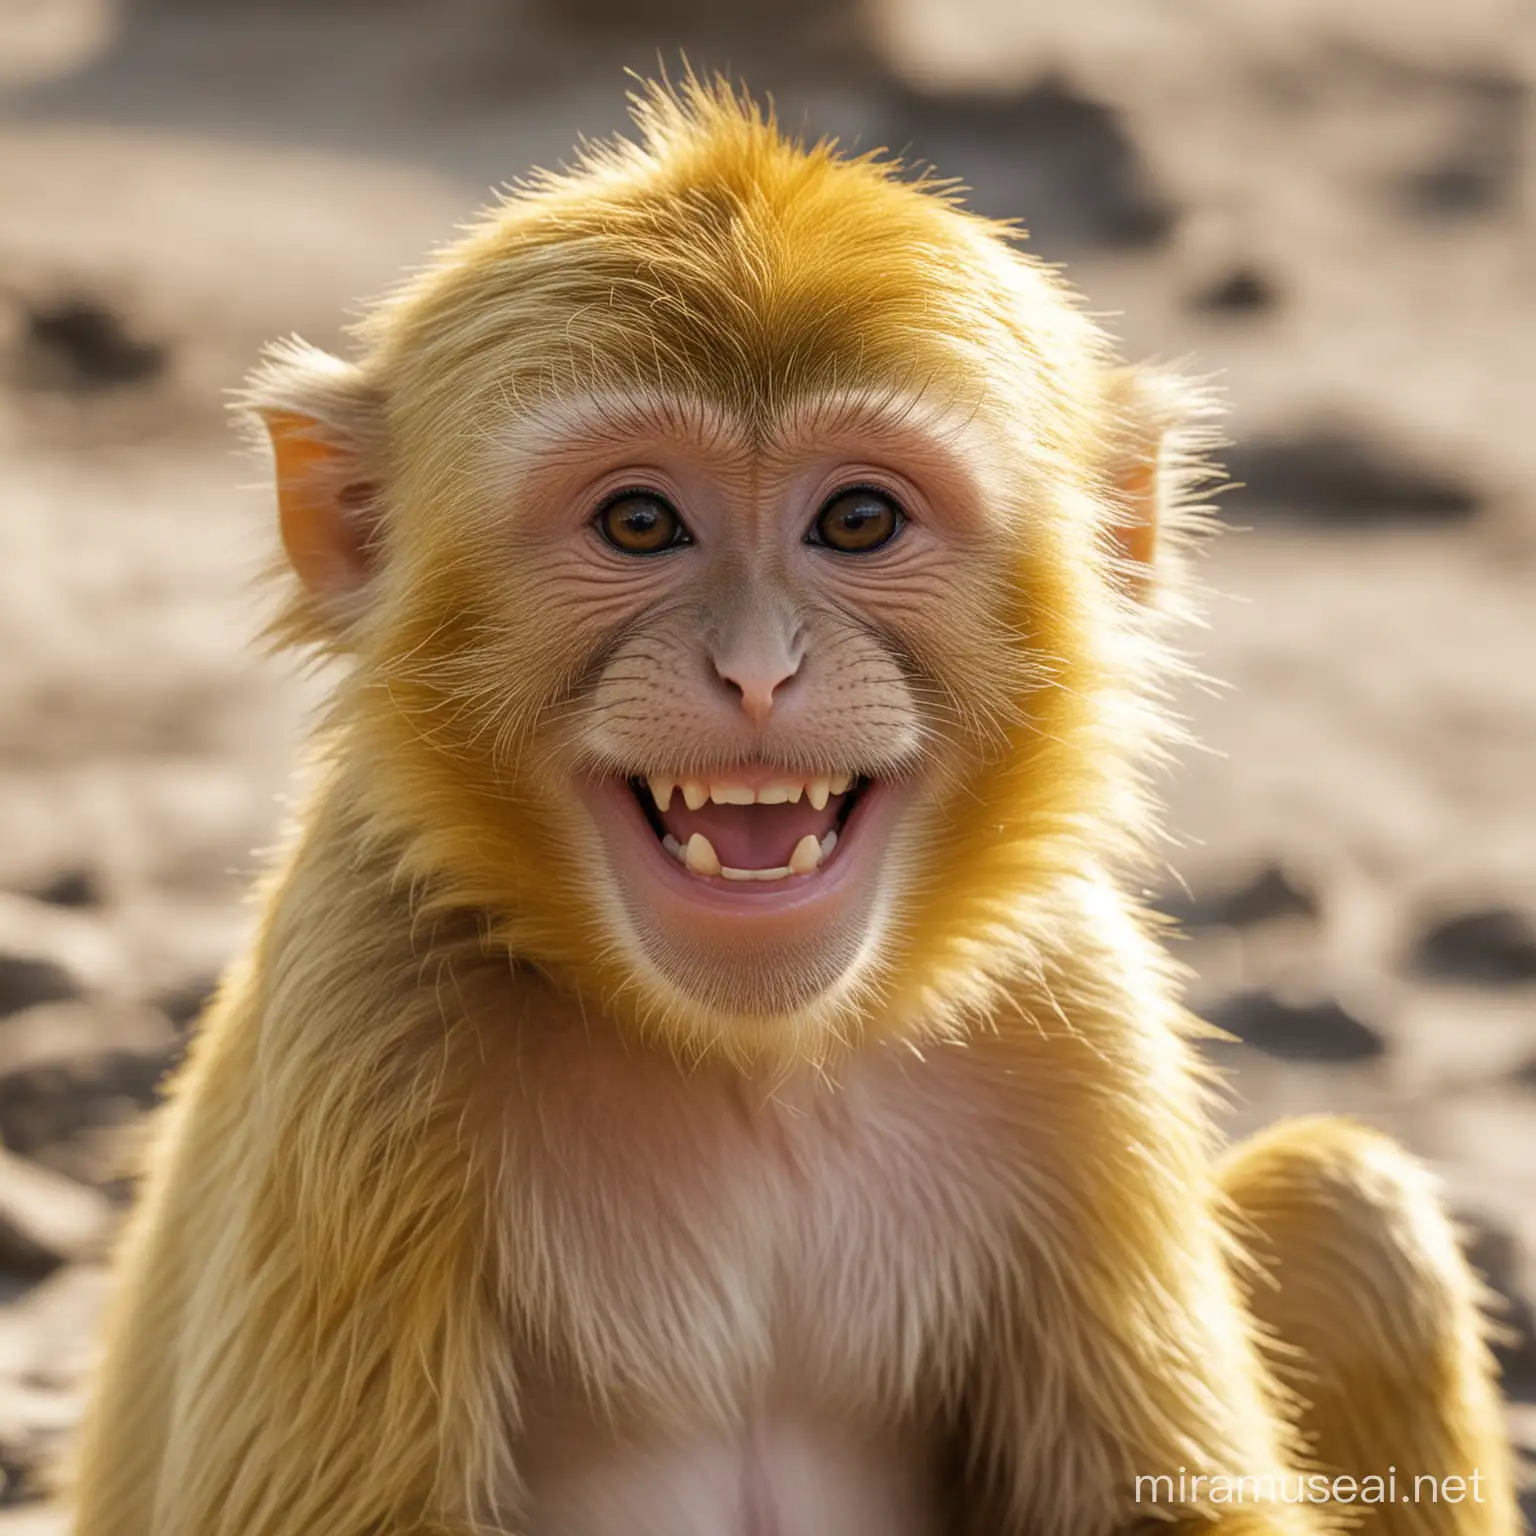 Cheerful Yellow Monkey Relaxing on a Sunny Beach